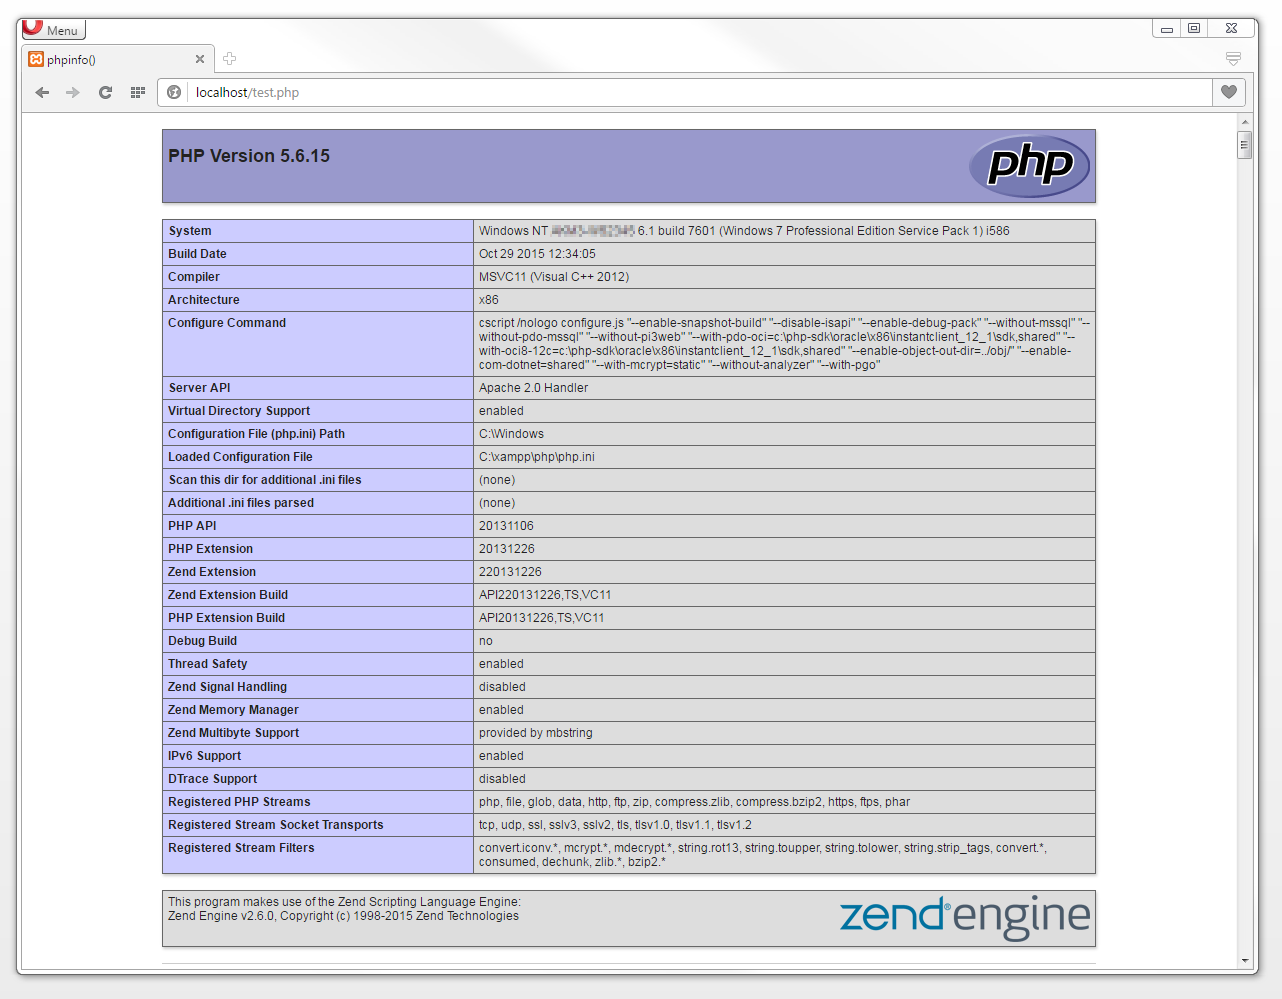 Die PHP-Funktion phpinfo()